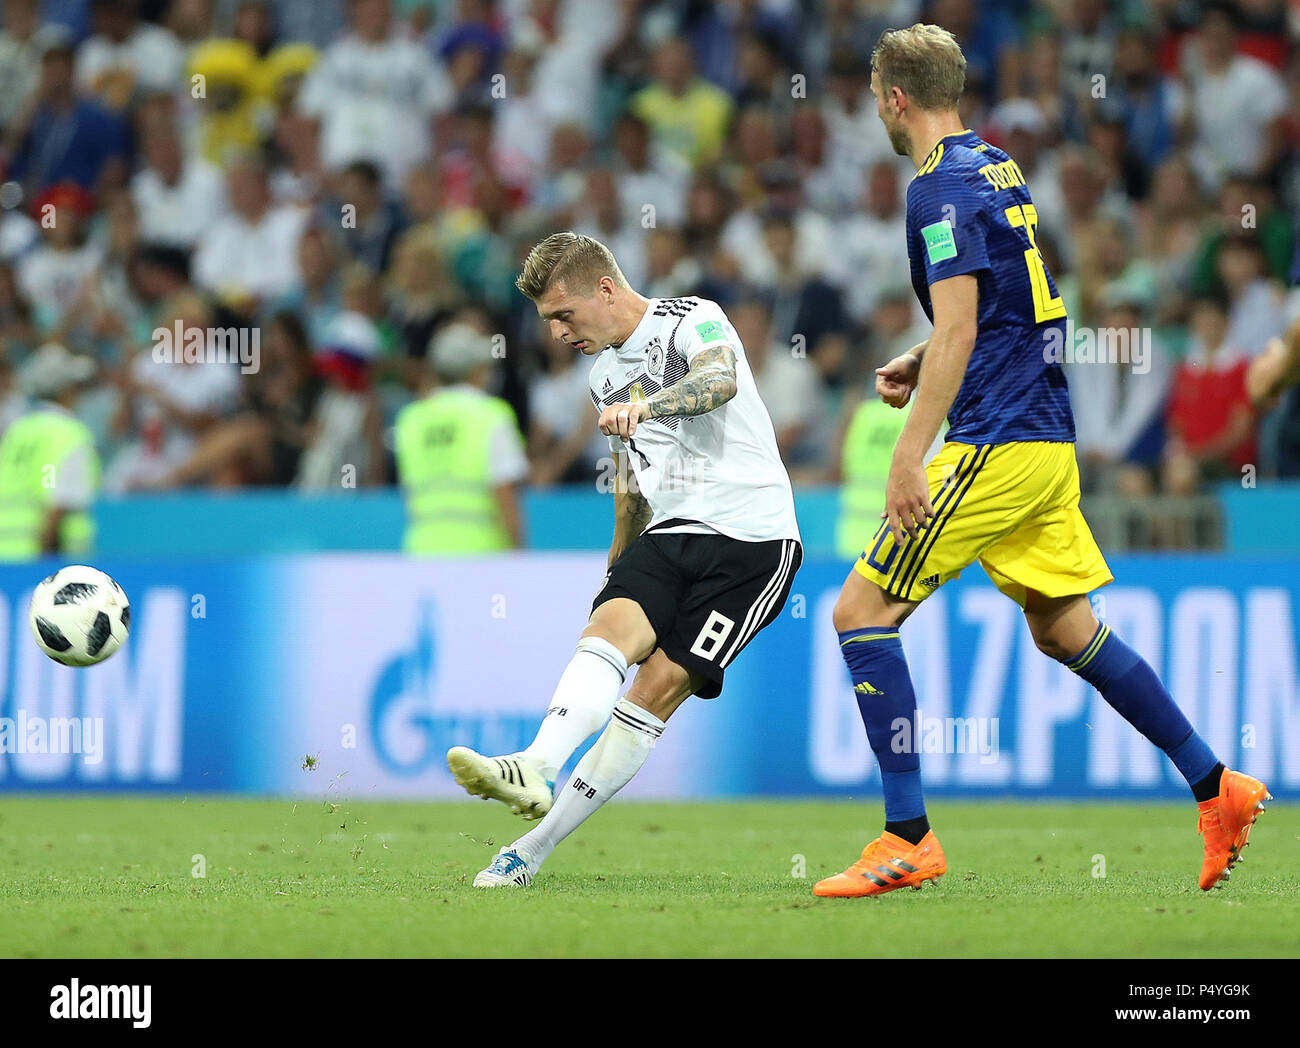 Sochi, Russia. 23rd June, 2018. Toni Kroos (L) of Germany shoots during the 2018 FIFA World Cup Group F match between Germany and Sweden in Sochi, Russia, June 23, 2018. Credit: Fei Maohua/Xinhua/Alamy Live News Stock Photo